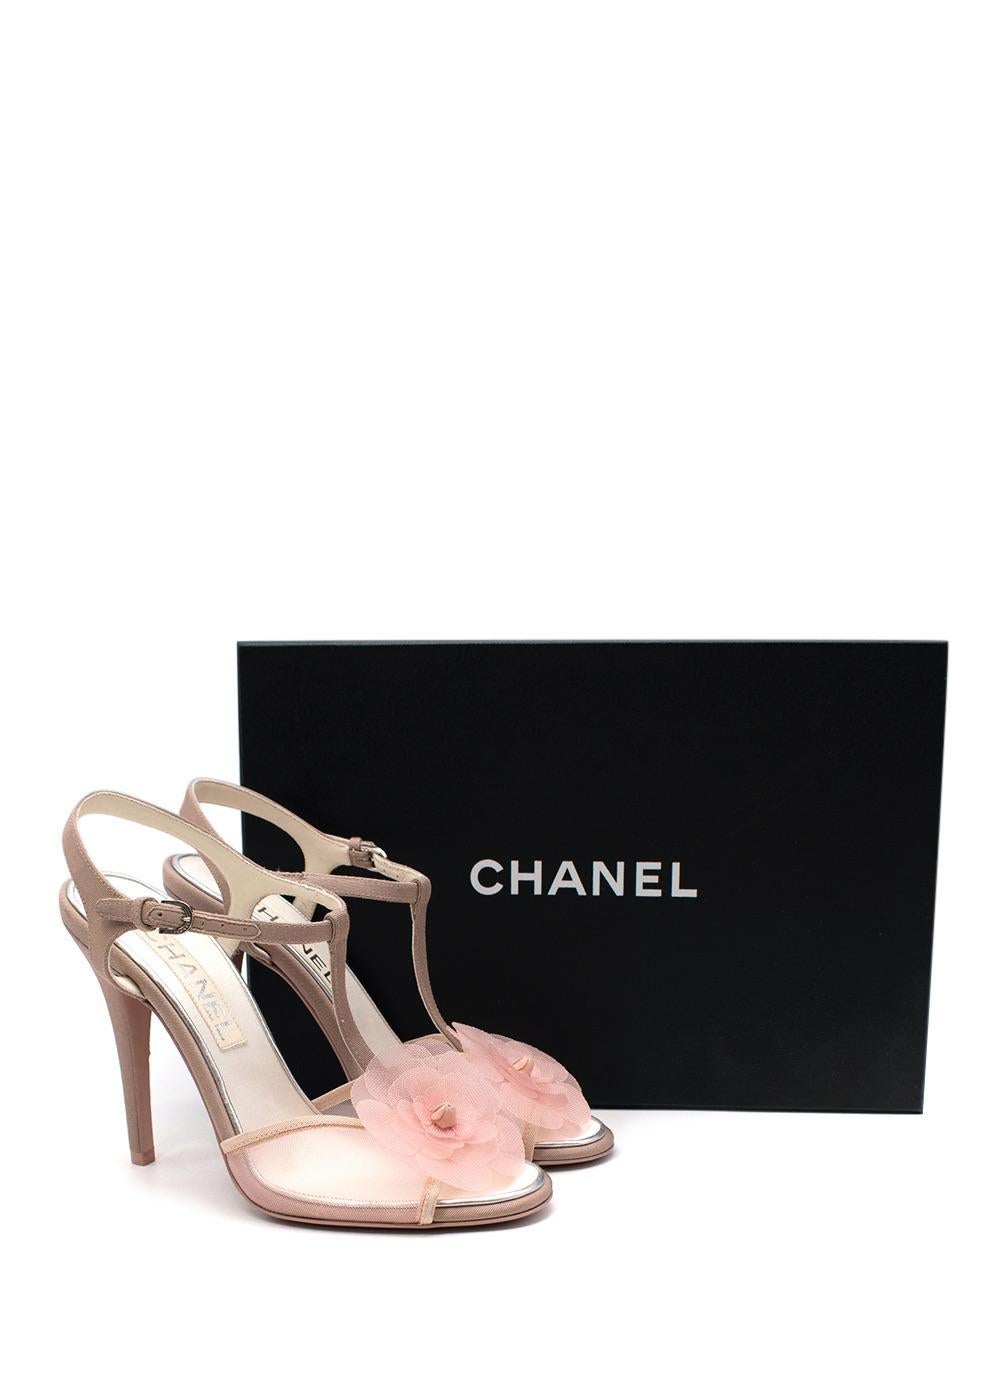 Chanel Mesh Camellia Sandals size 38

- Crafted in canvas and mesh these strappy heeled sandals are finished with a textural 3D flower on the peep toe
- Set on a stiletto heel 
- Adjustable buckle strap 
- Lined in cream